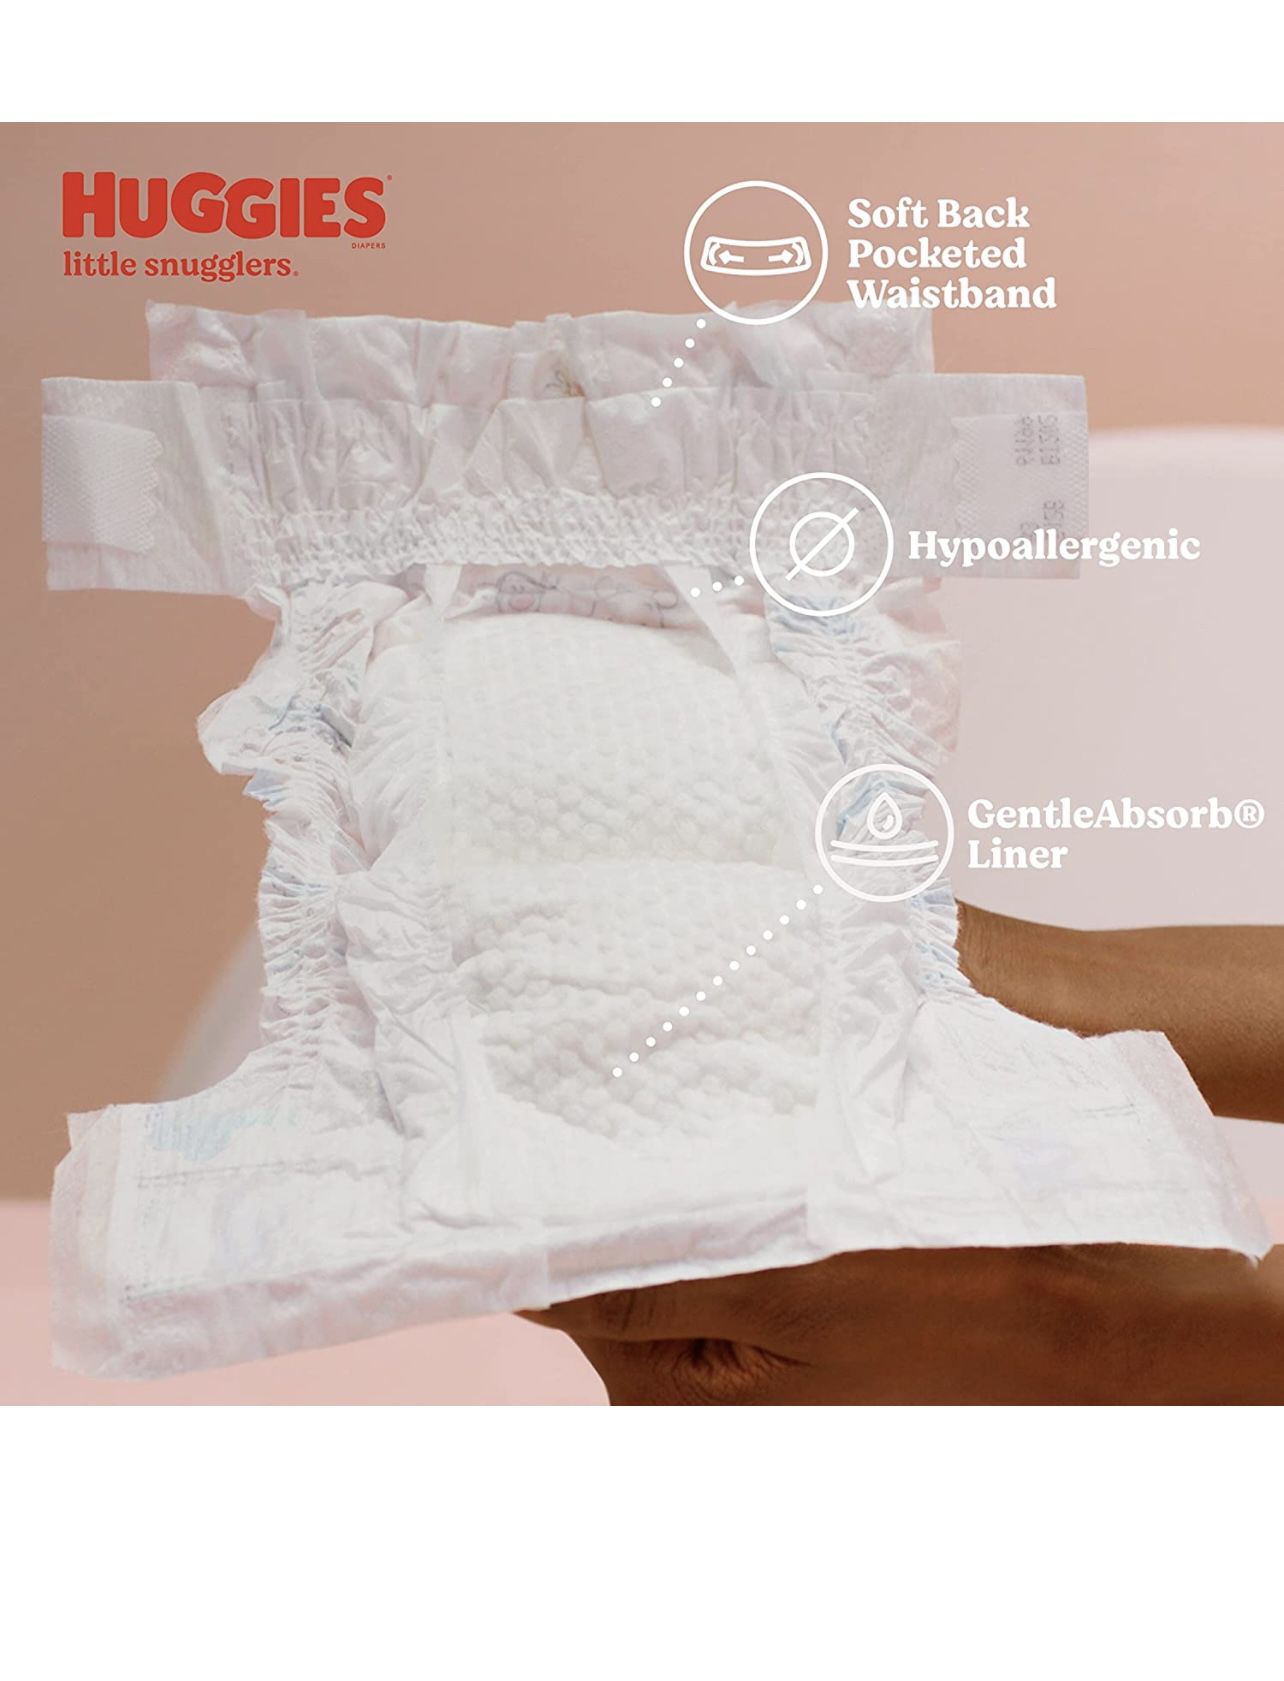 Baby Diapers Size 3 (16-28 lbs), 156ct, Huggies Little Snugglers